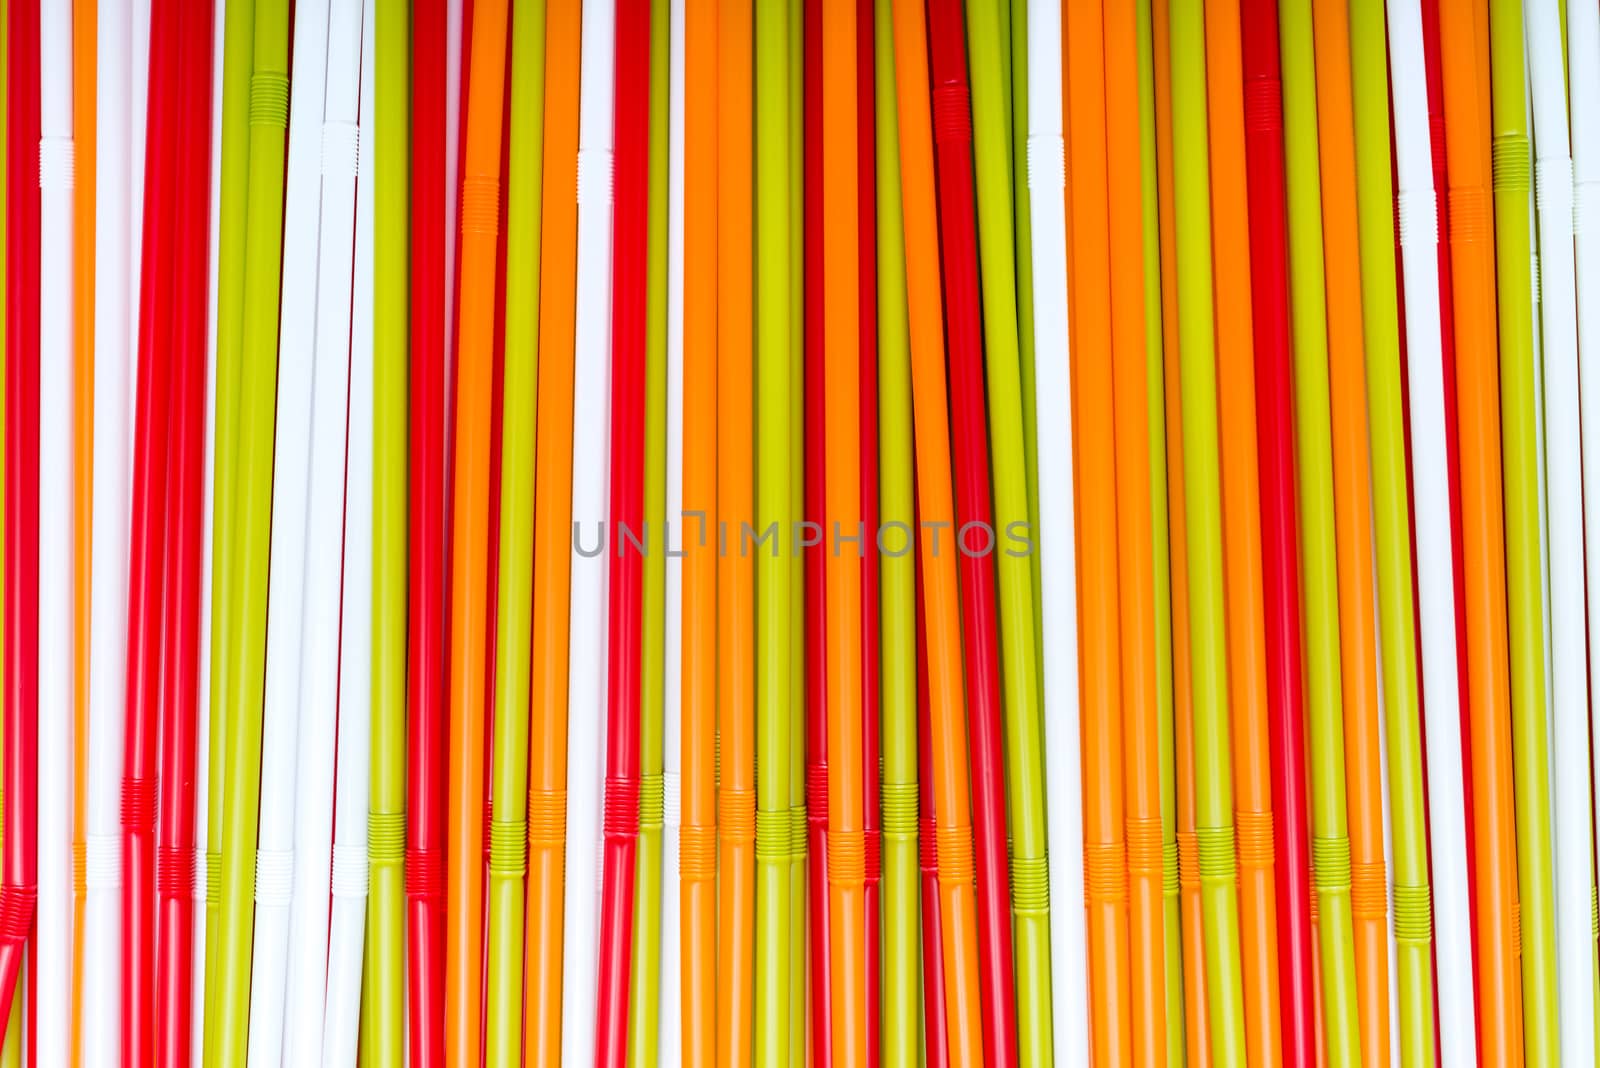 The colorful plastic tubes background and texture